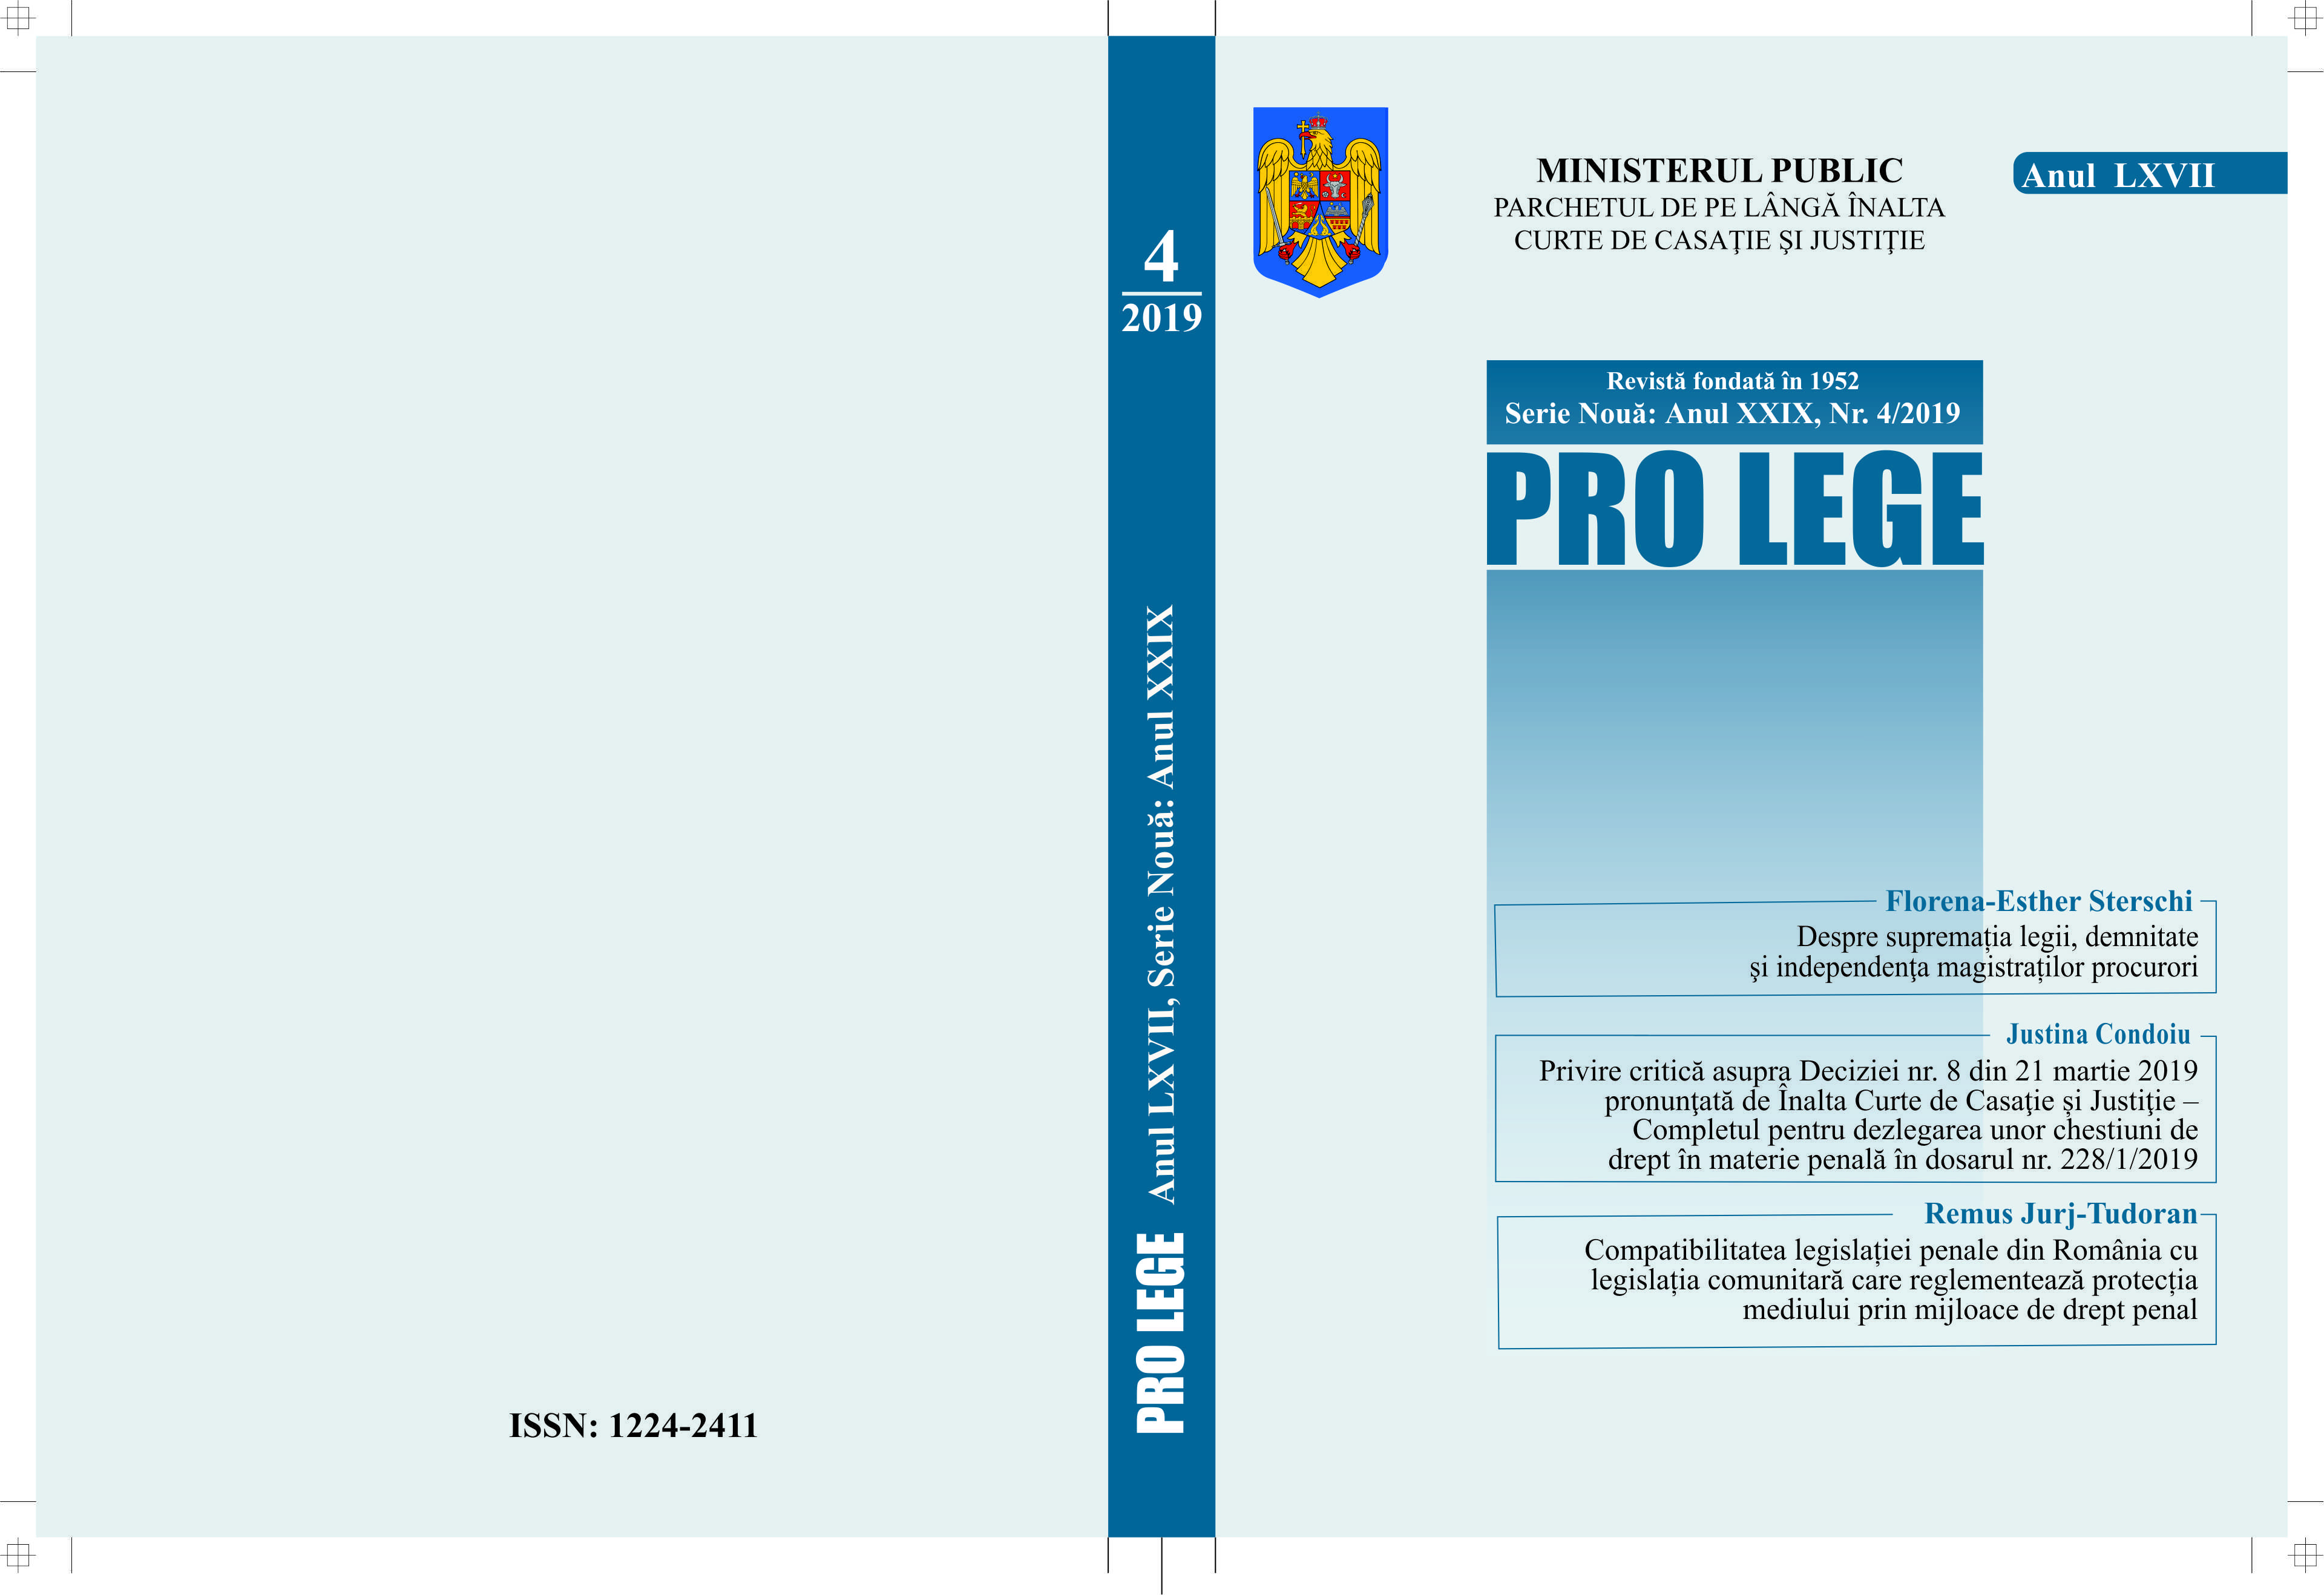 Considerations on the rule of law, the dignity and the independence of the prosecutor magistrates Cover Image